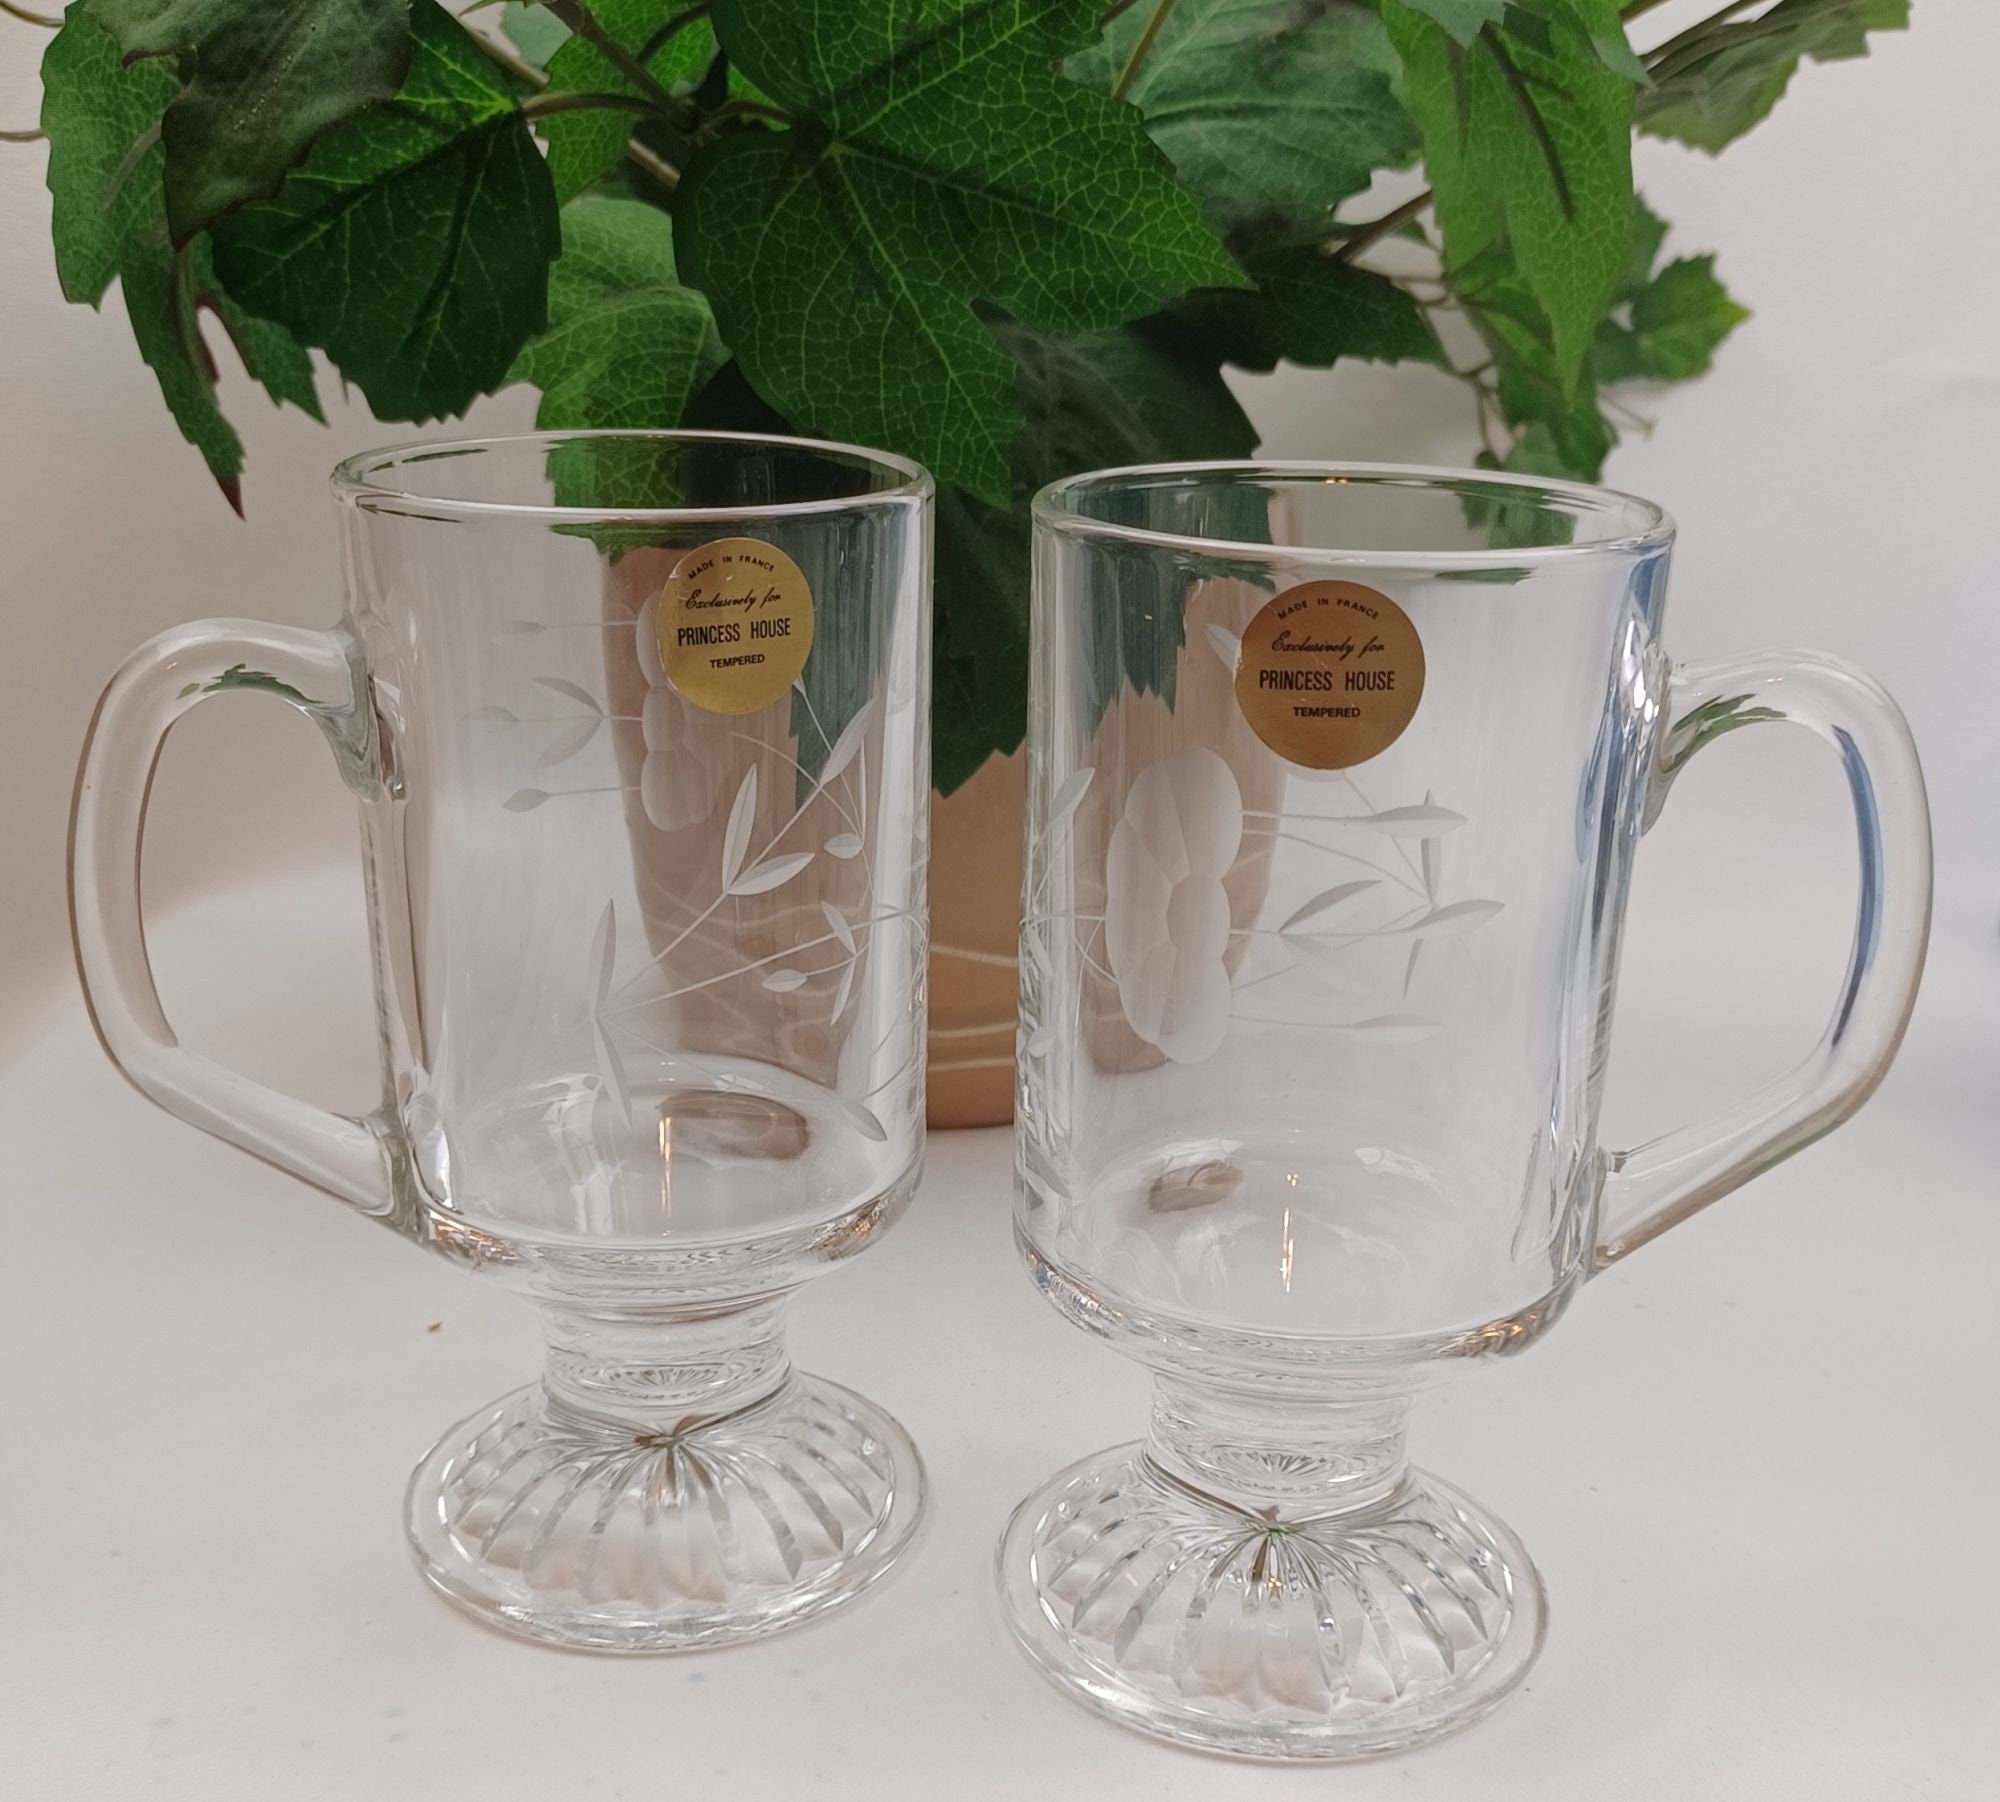 Crystalia Set of 2 Irish Coffee Mugs with Handle, Tall Funnel Clear Glasses for Iced Coffee, Latte, Cappuccino, Hot Chocolate